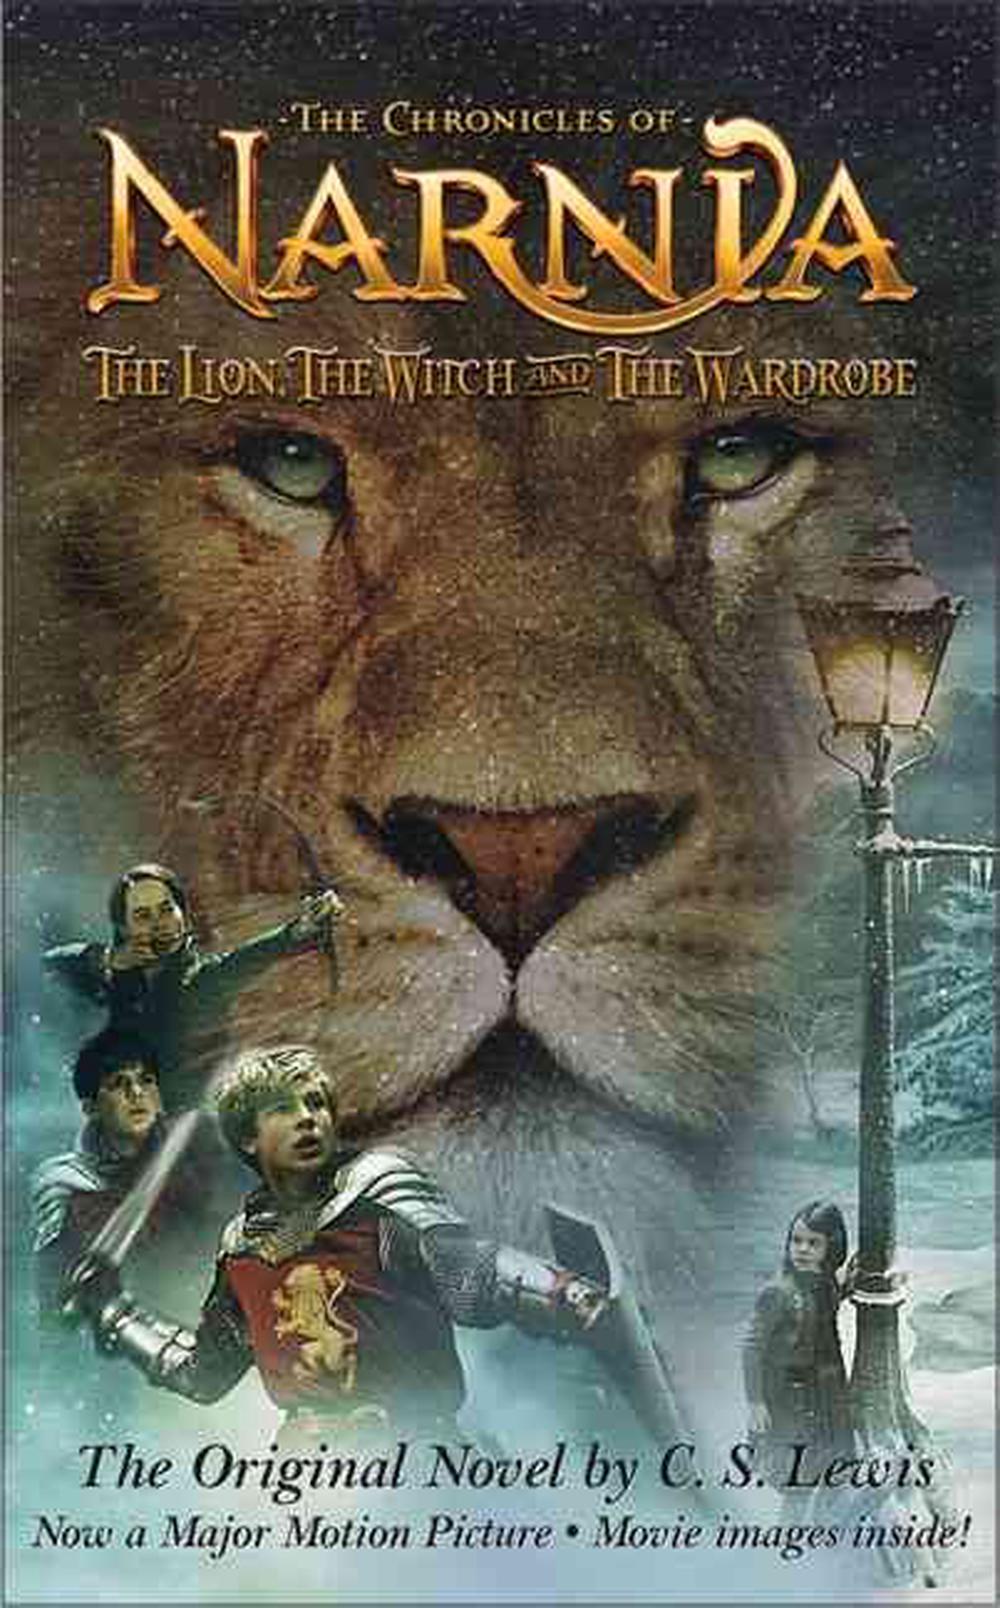 the lion the witch and the wardrobe book series